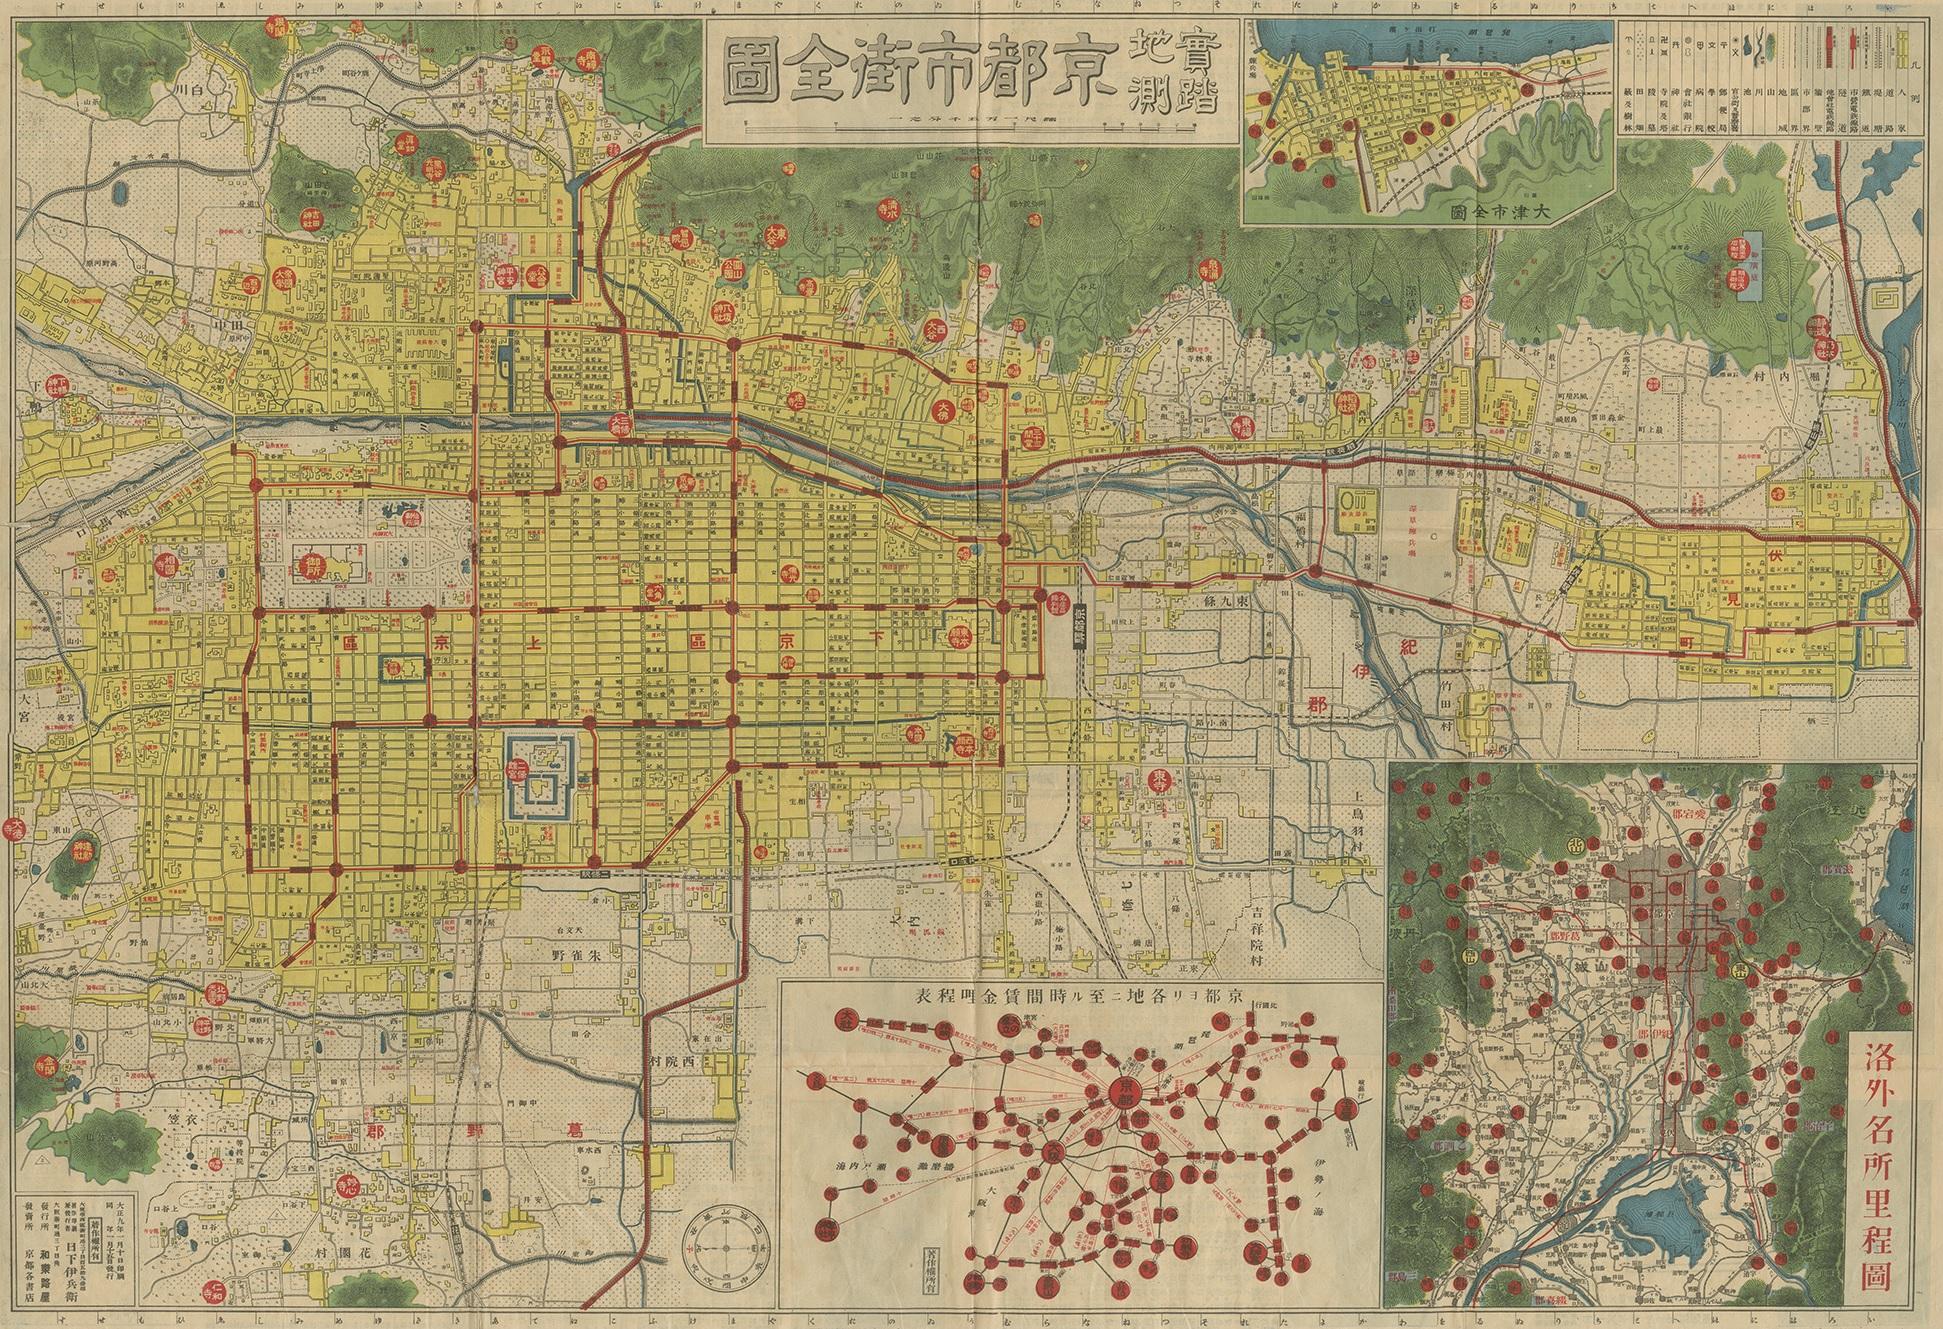 Antique folding map of Kyoto, Japan. On the verso of this map photos of buildings, other structures and informative text can be found.